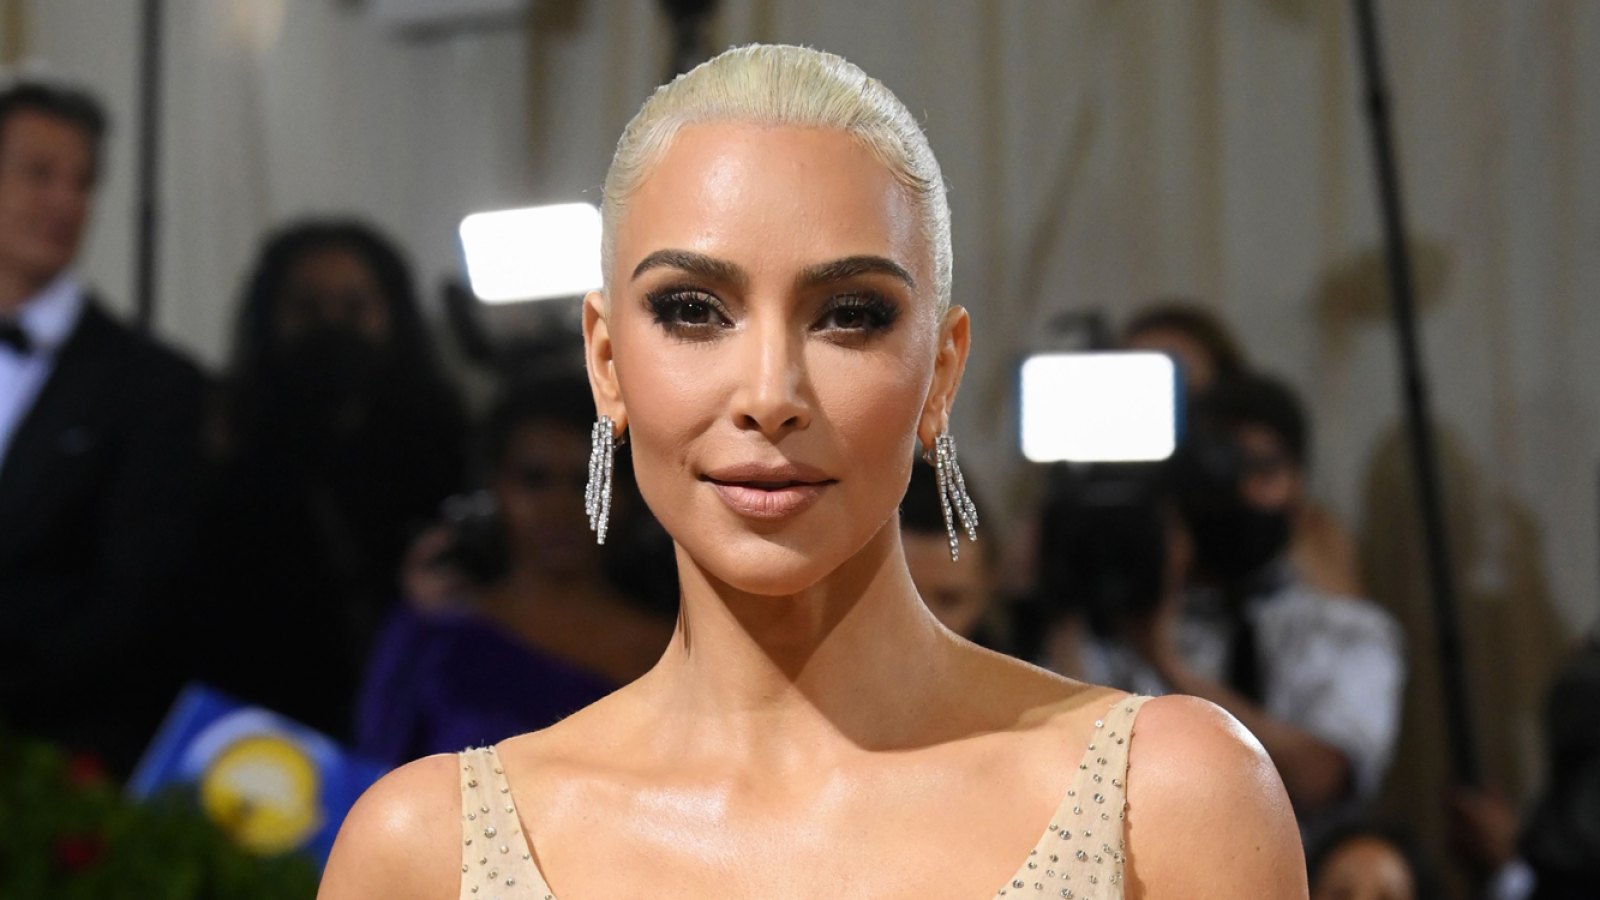 Kim Kardashian Recalls 'Tedious and Annoying' Process of Dyeing Her Hair for the Met Gala: 'We Have to Get It Right'